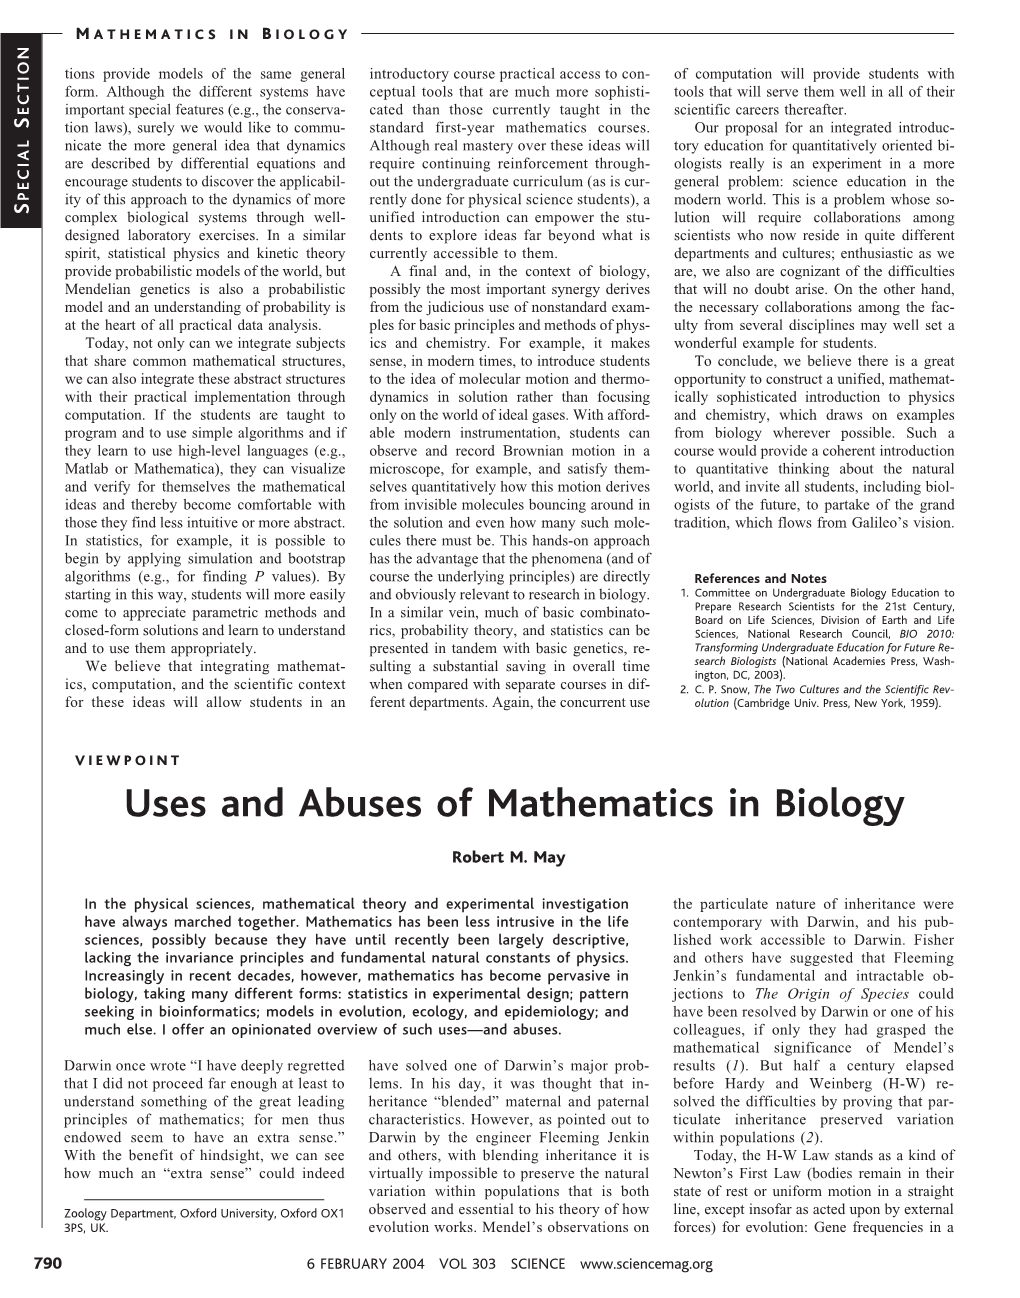 Uses and Abuses of Mathematics in Biology